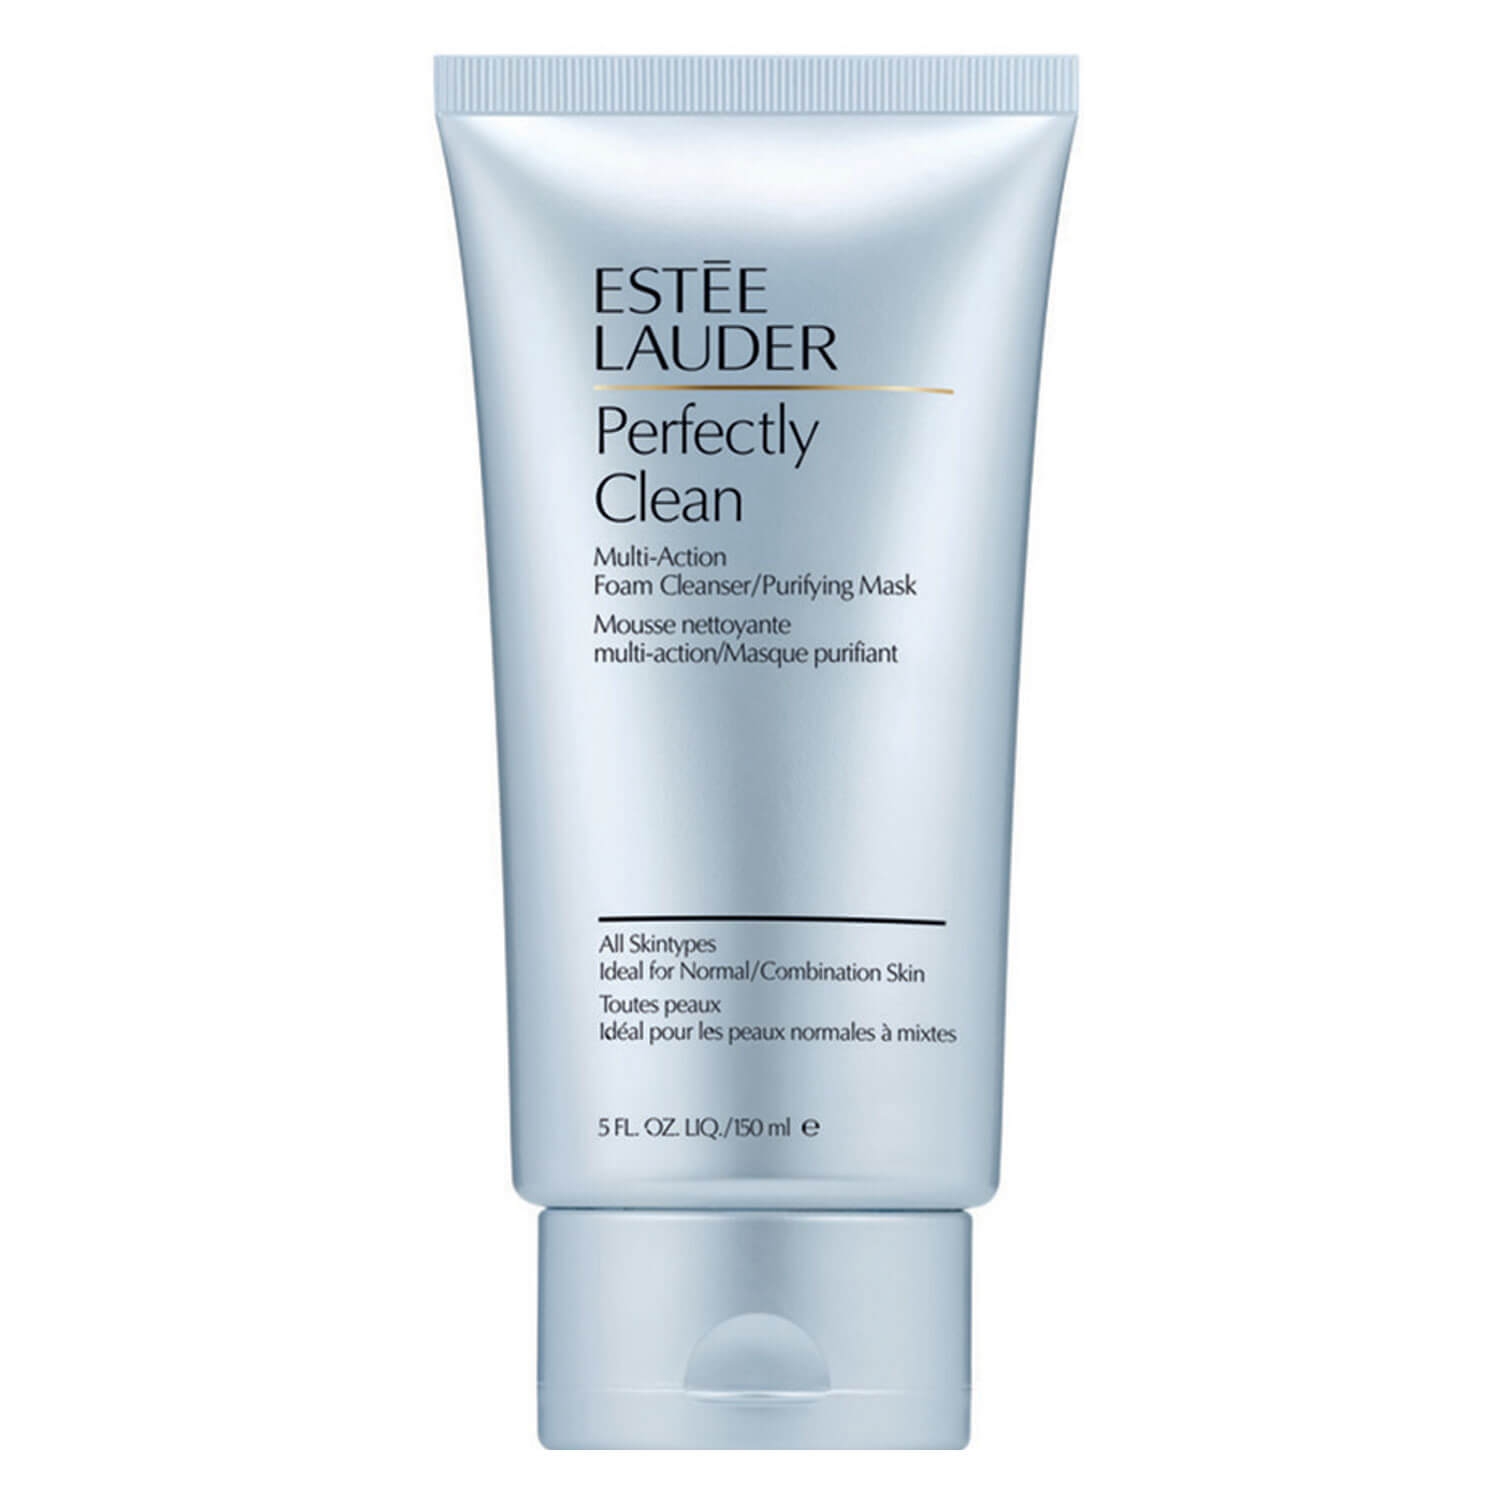 Product image from Perfectly Clean - Multi-Action Foam Cleanser/Purifying Mask